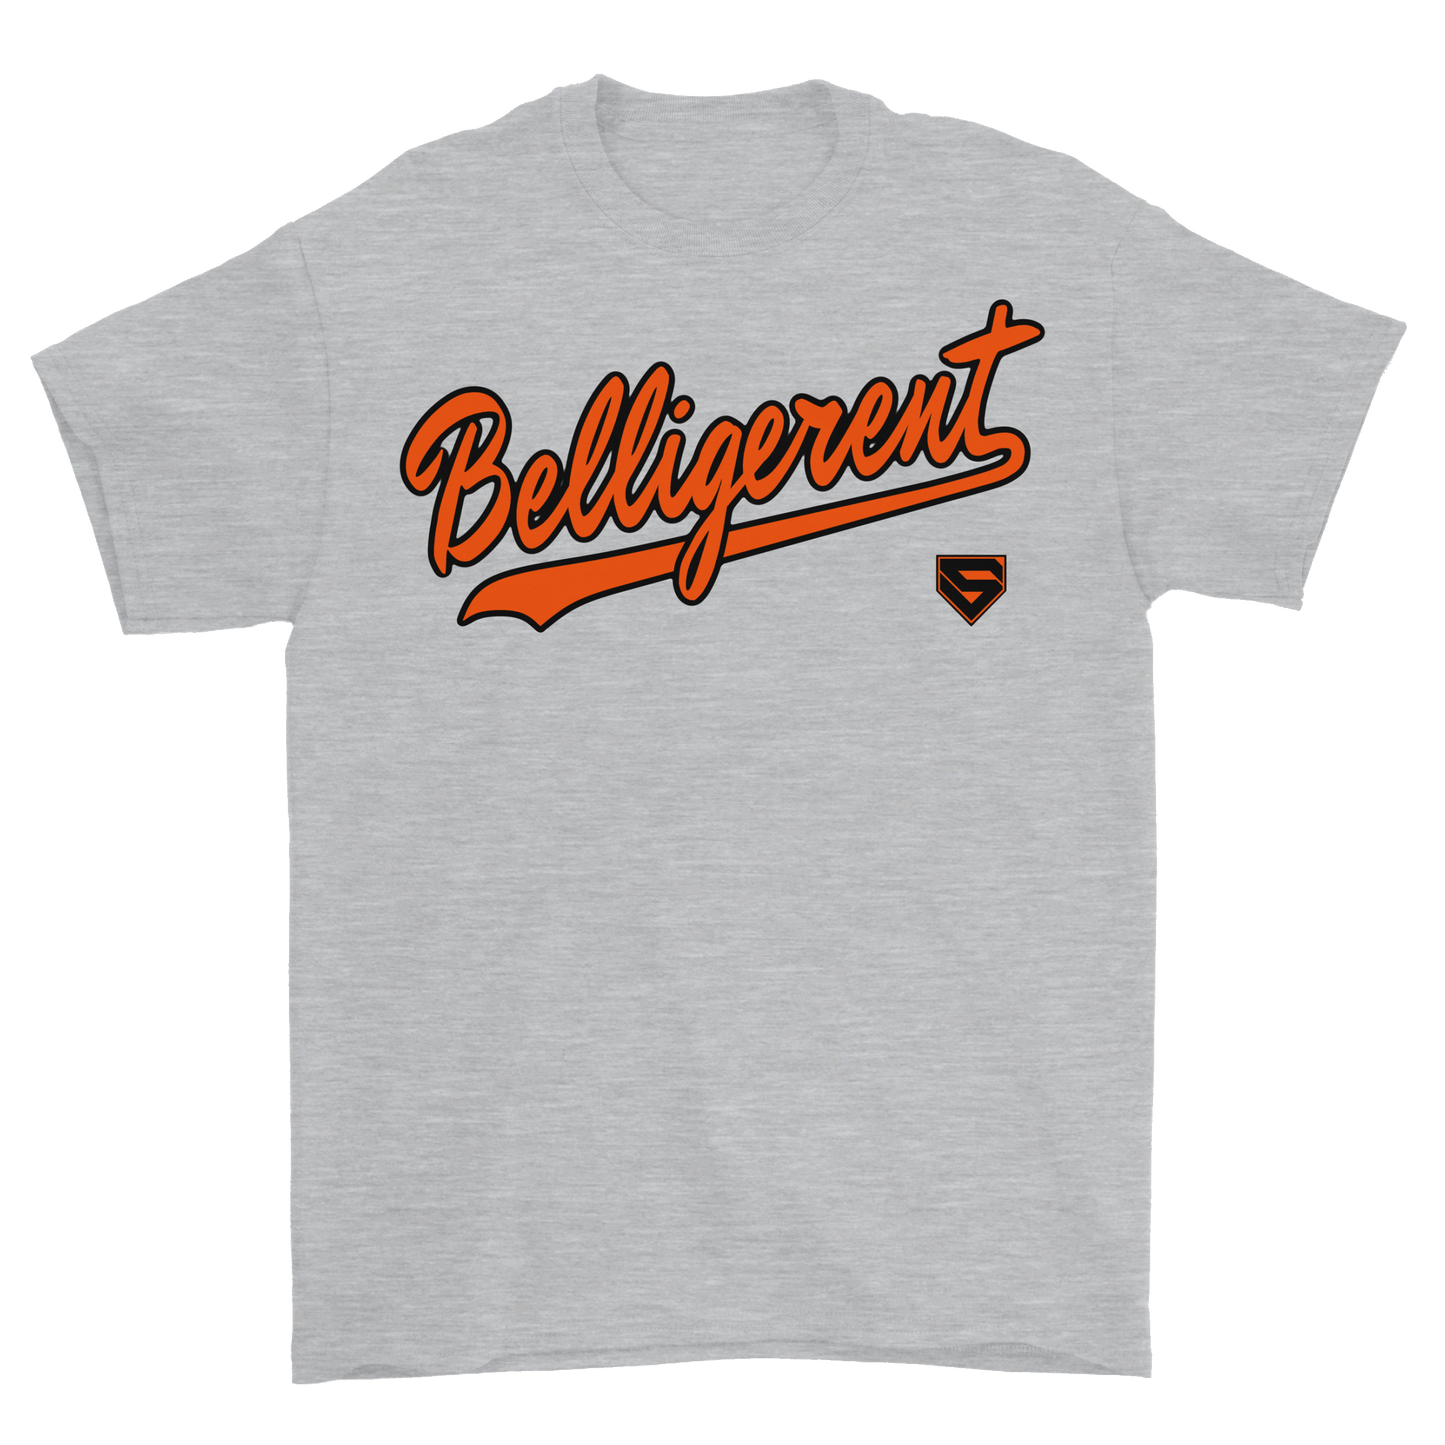 Belligerent Shirsey Men's Tee from Seamheaded Apparel